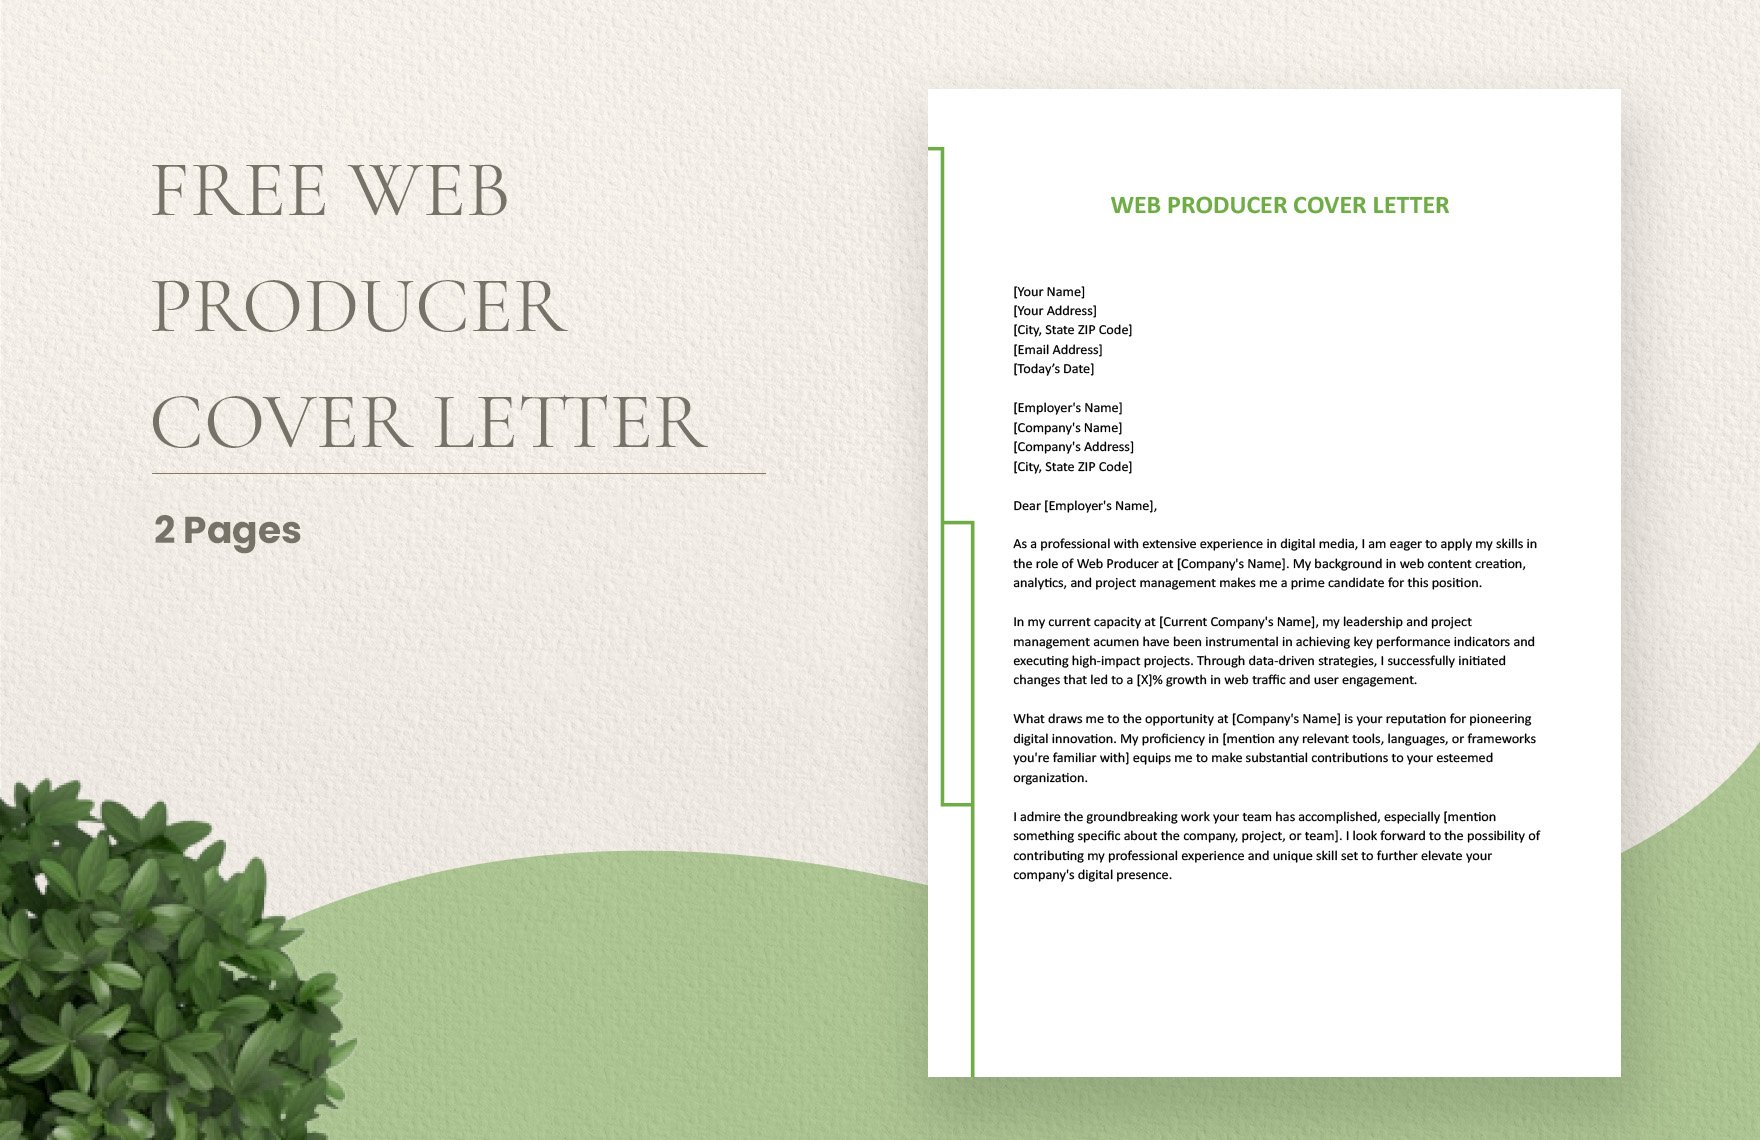 Web Producer Cover Letter